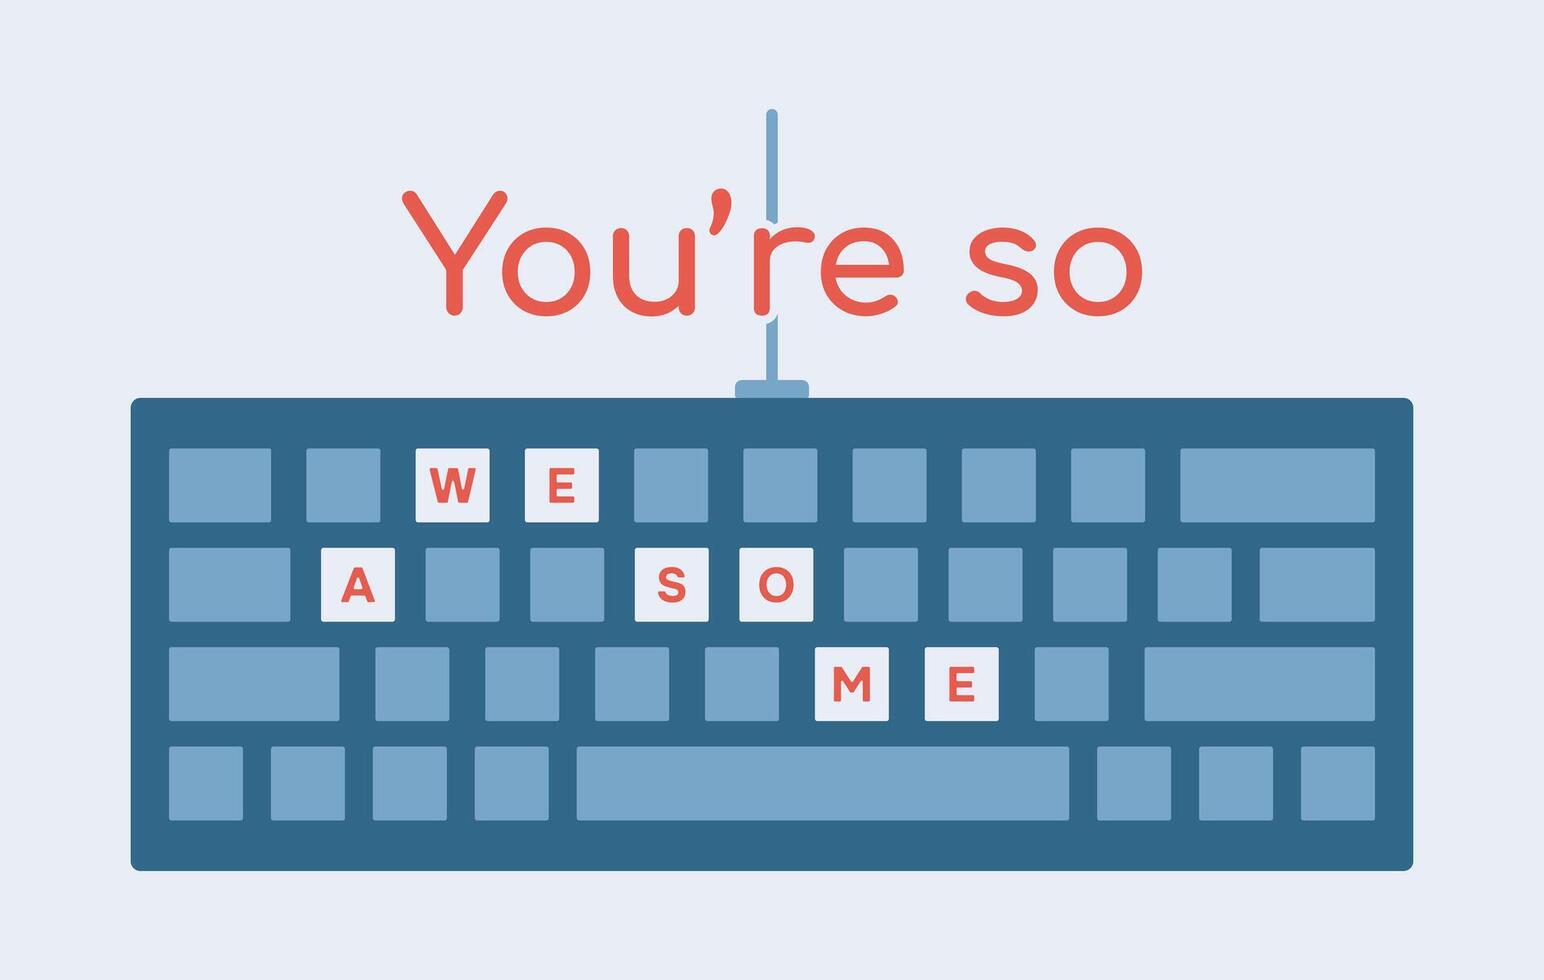 Computer Keyboard You are so awesome. Valentine card with a Compliment. Keypad. Equipment from IT, office. Letters are printed on the buttons. Typing on keys. Technology. Delight. illustration vector